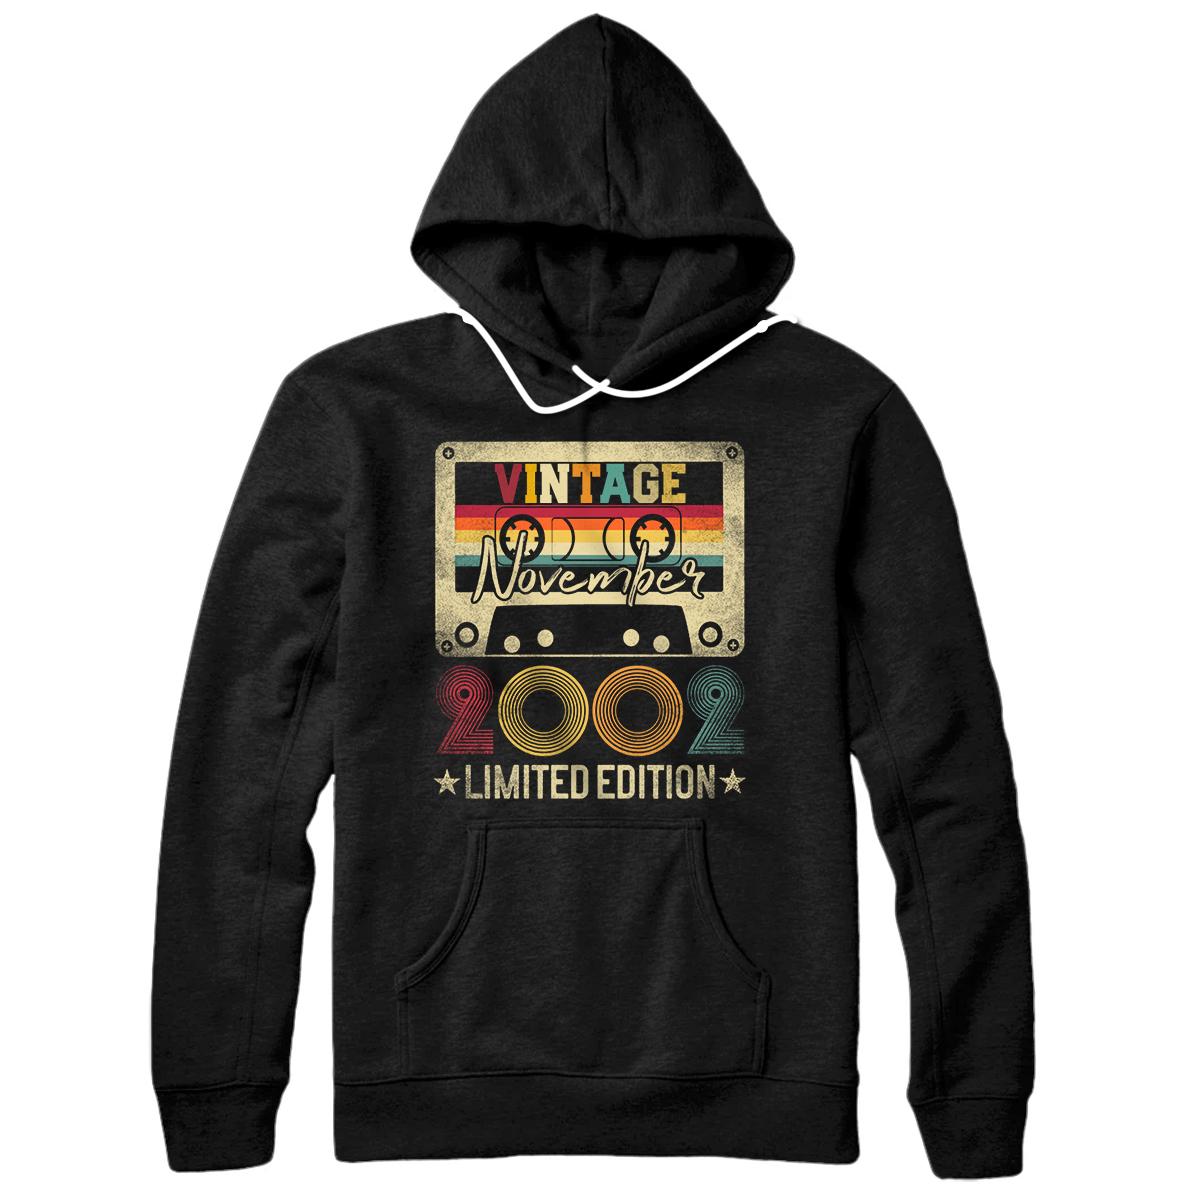 Personalized November 2002 18th Birthday Gift Limited Edition Vintage Pullover Hoodie